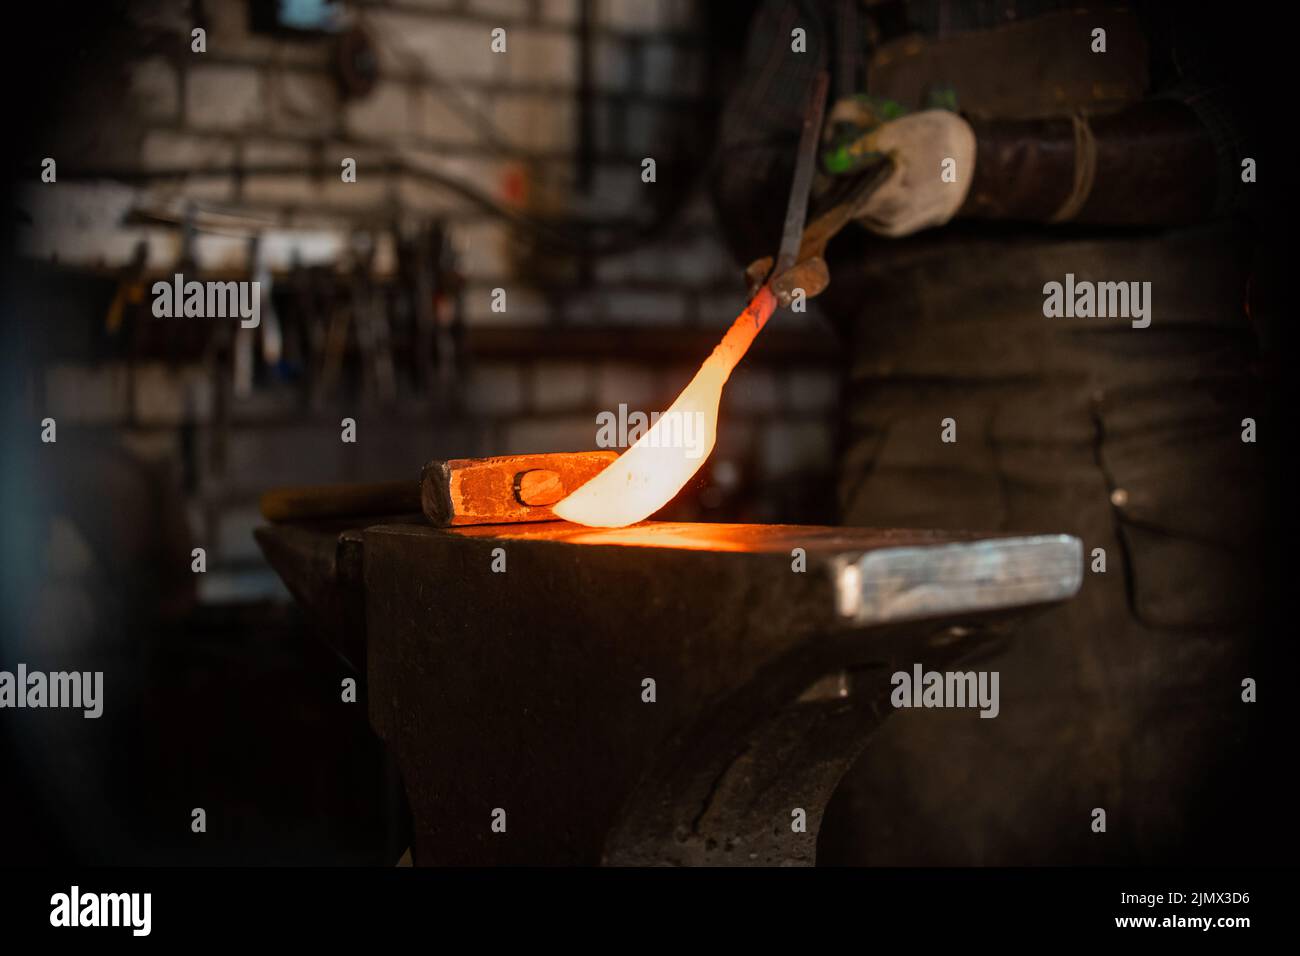 Forging a knife out of the hot metal - holding the knife between the forceps Stock Photo